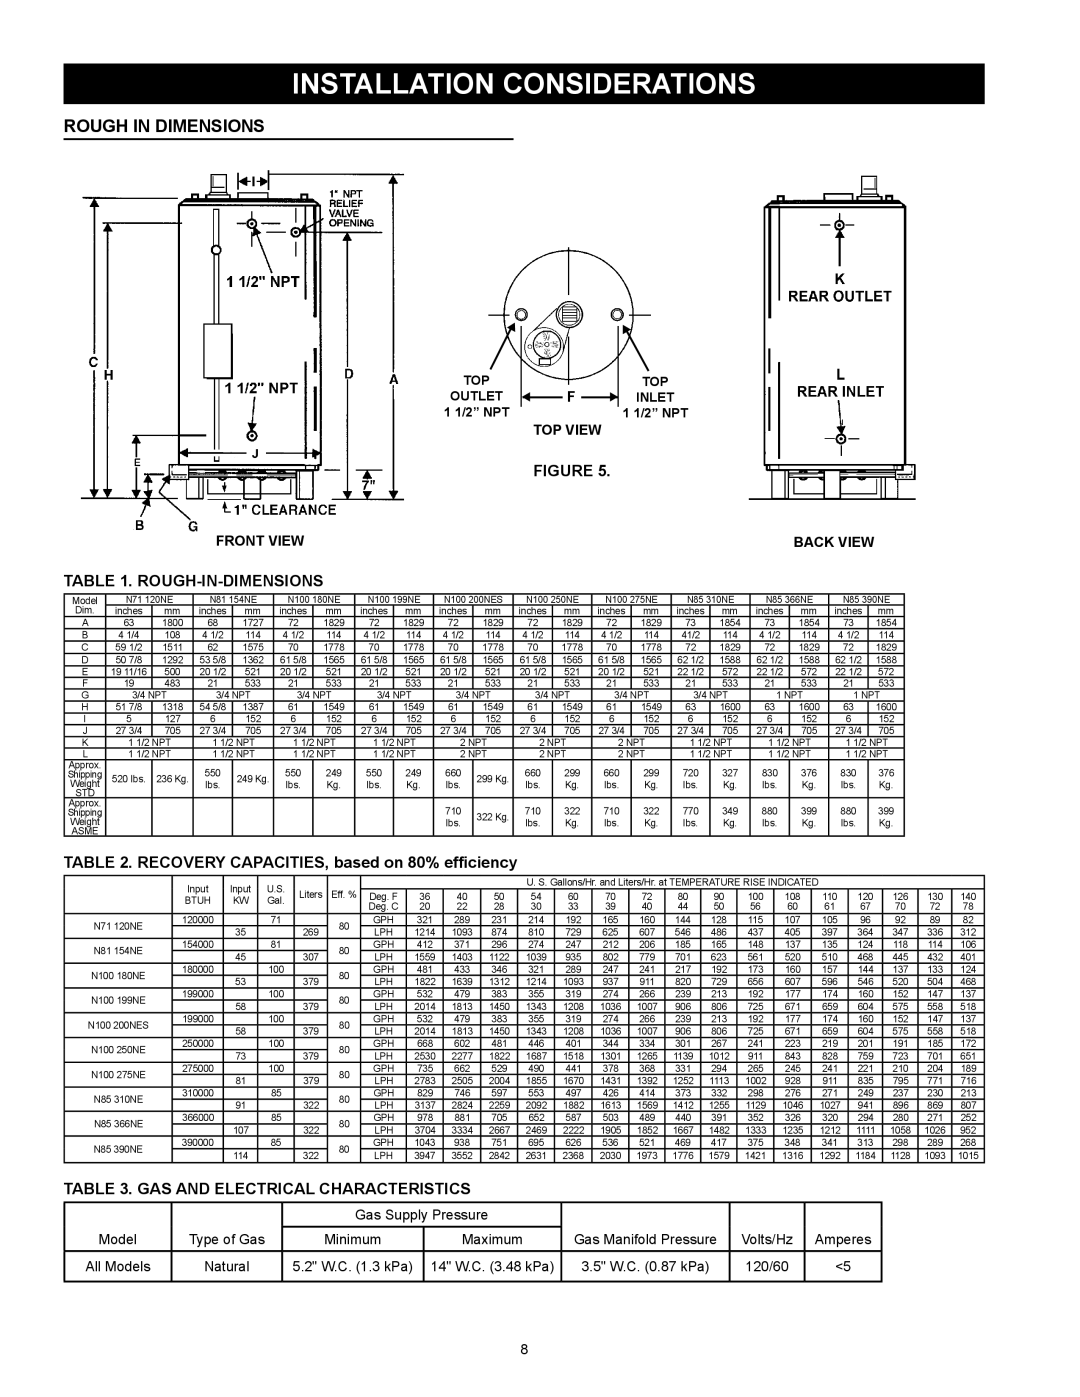 Reliance Water Heaters N85390NE, N71120NE installation considerations, Rough In Dimensions, Figure, Rough-In-Dimensions 